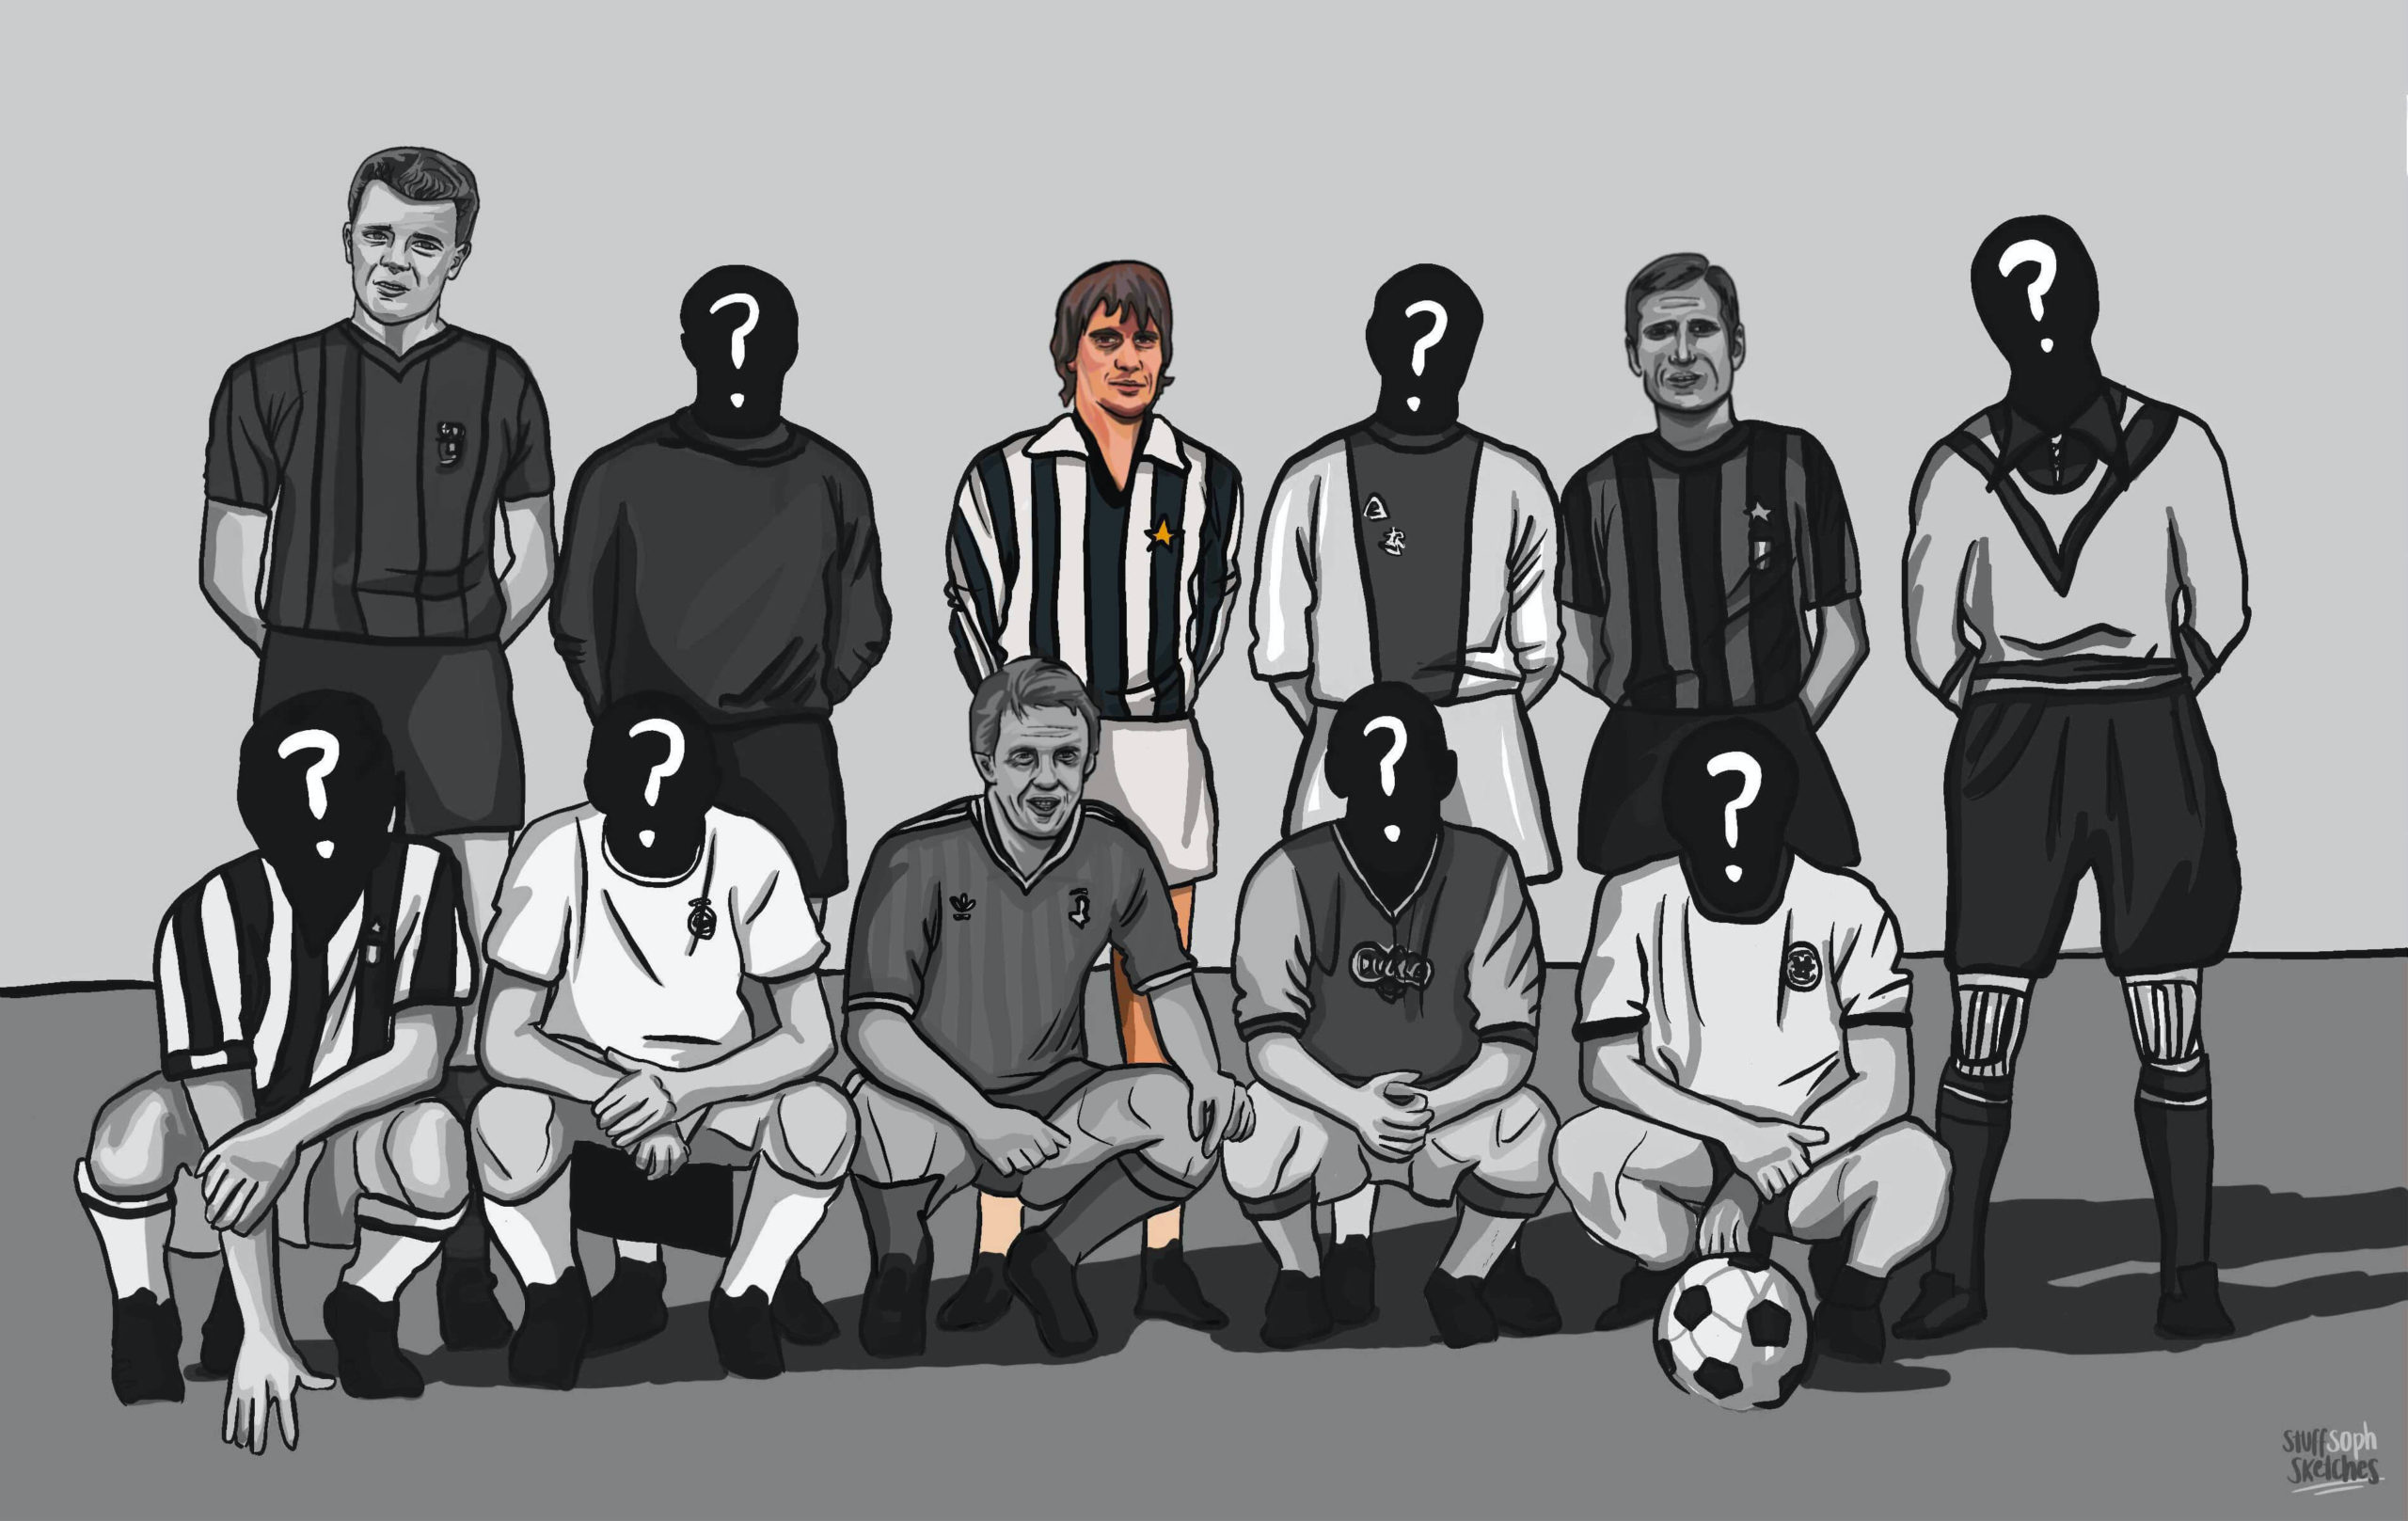 Marco Tardelli in colour, amongst the forgotten eleven lineup in black and white